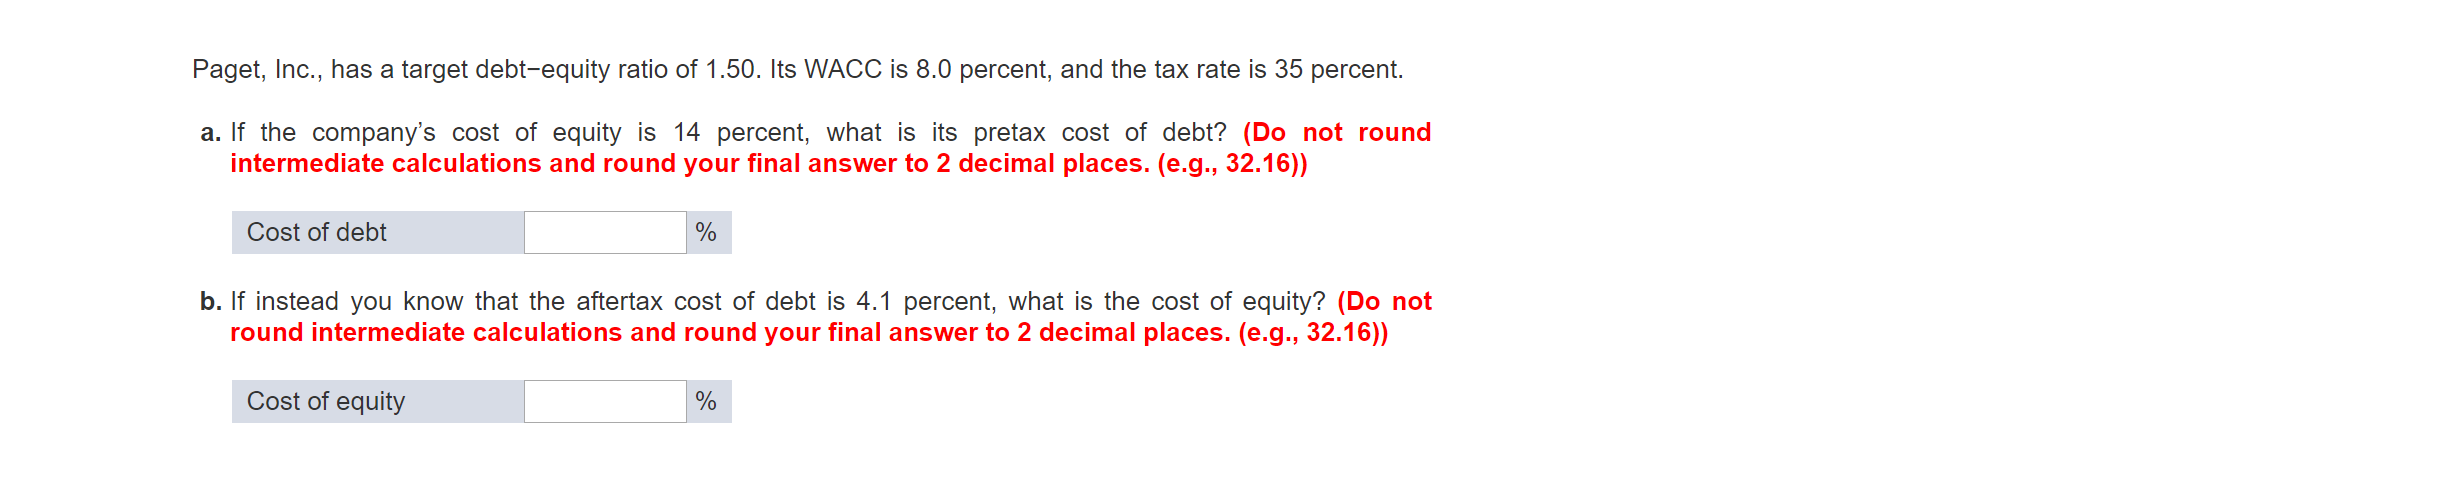 Paget, Inc., has a target debt-equity ratio of 1.50. Its WACC is 8.0 percent, and the tax rate is 35 percent.
a. If the company's cost of equity is 14 percent, what is its pretax cost of debt? (Do not round
intermediate calculations and round your final answer to 2 decimal places. (e.g., 32.16))
Cost of debt
b. If instead you know that the aftertax cost of debt is 4.1 percent, what is the cost of equity? (Do not
round intermediate calculations and round your final answer to 2 decimal places. (e.g., 32.16))
Cost of equity
